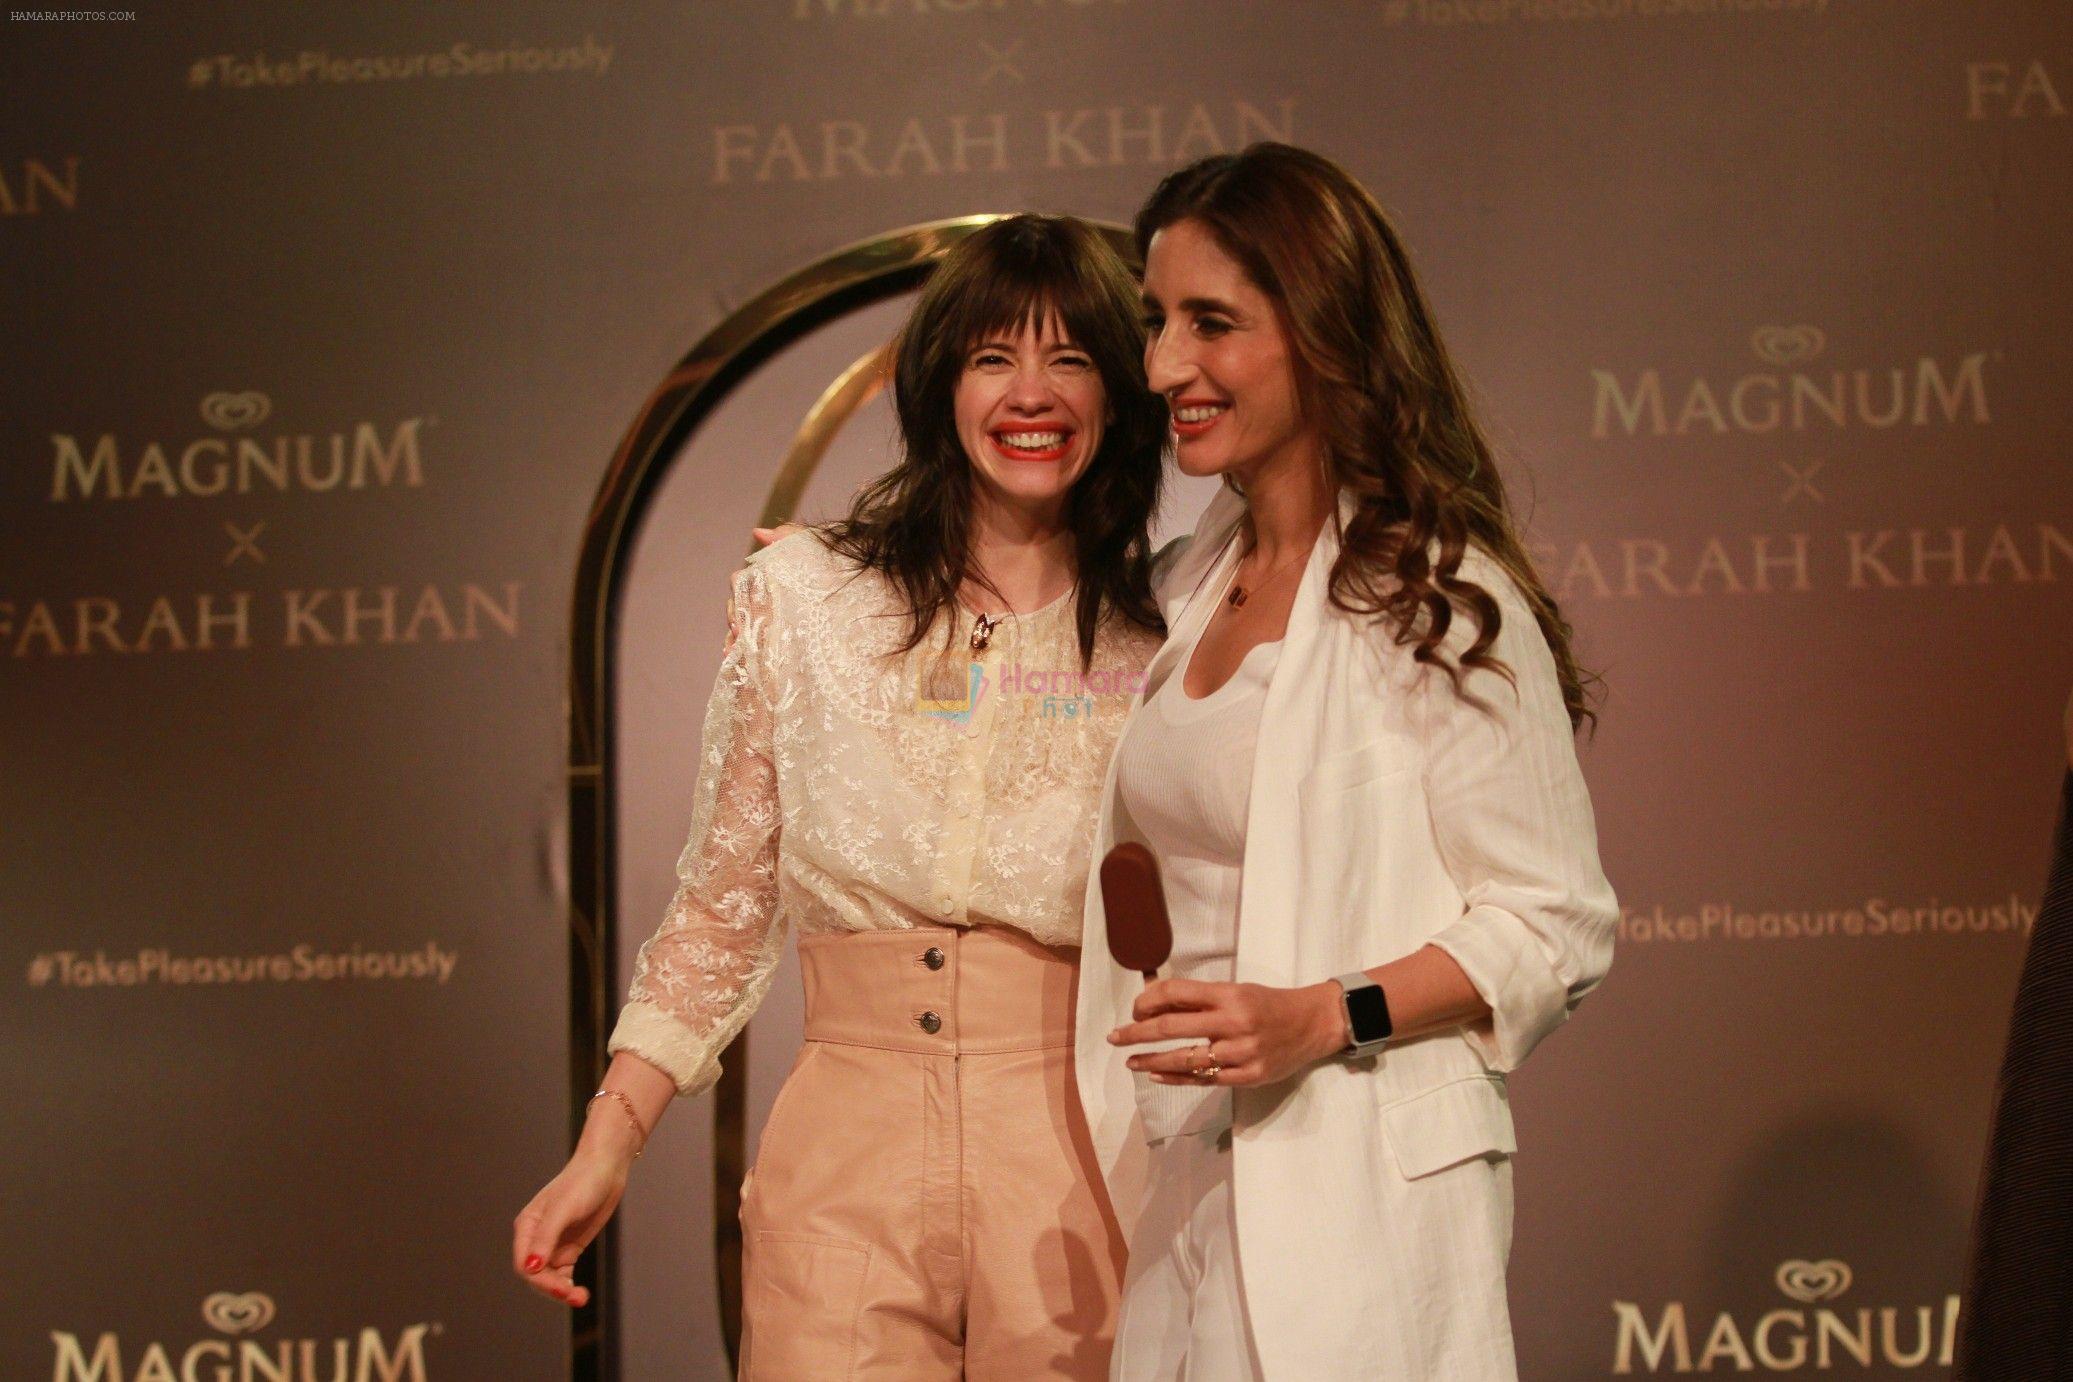 Kalki Koechlin, Farah Khan Ali unveil a collection of jewels in collaboration with Magnum on 24th April 2018